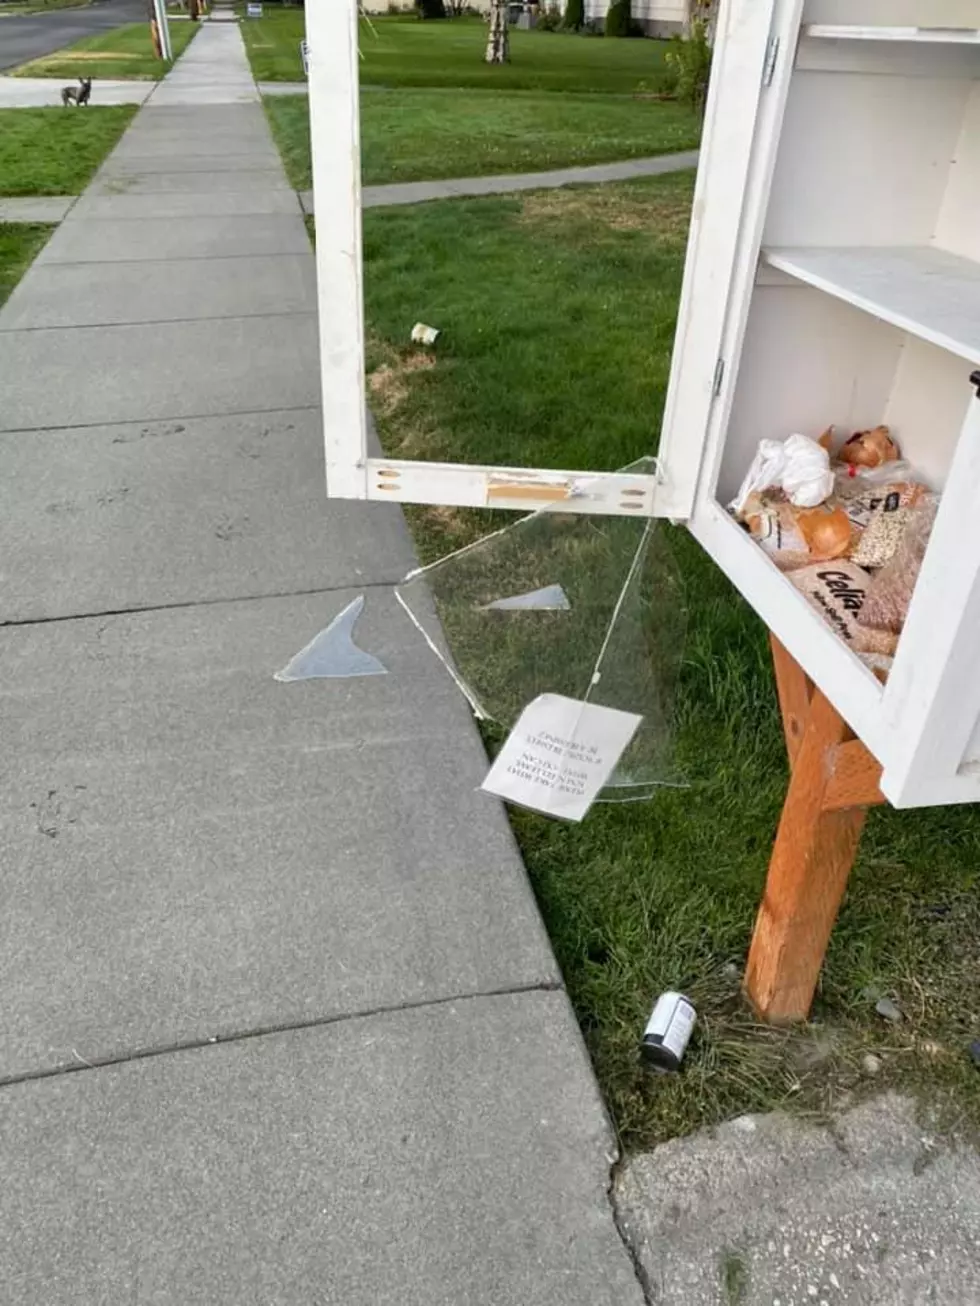 Waitsburg Church&#8217;s Blessing Box Is Vandalized&#8230;And Then Something Amazing Happens